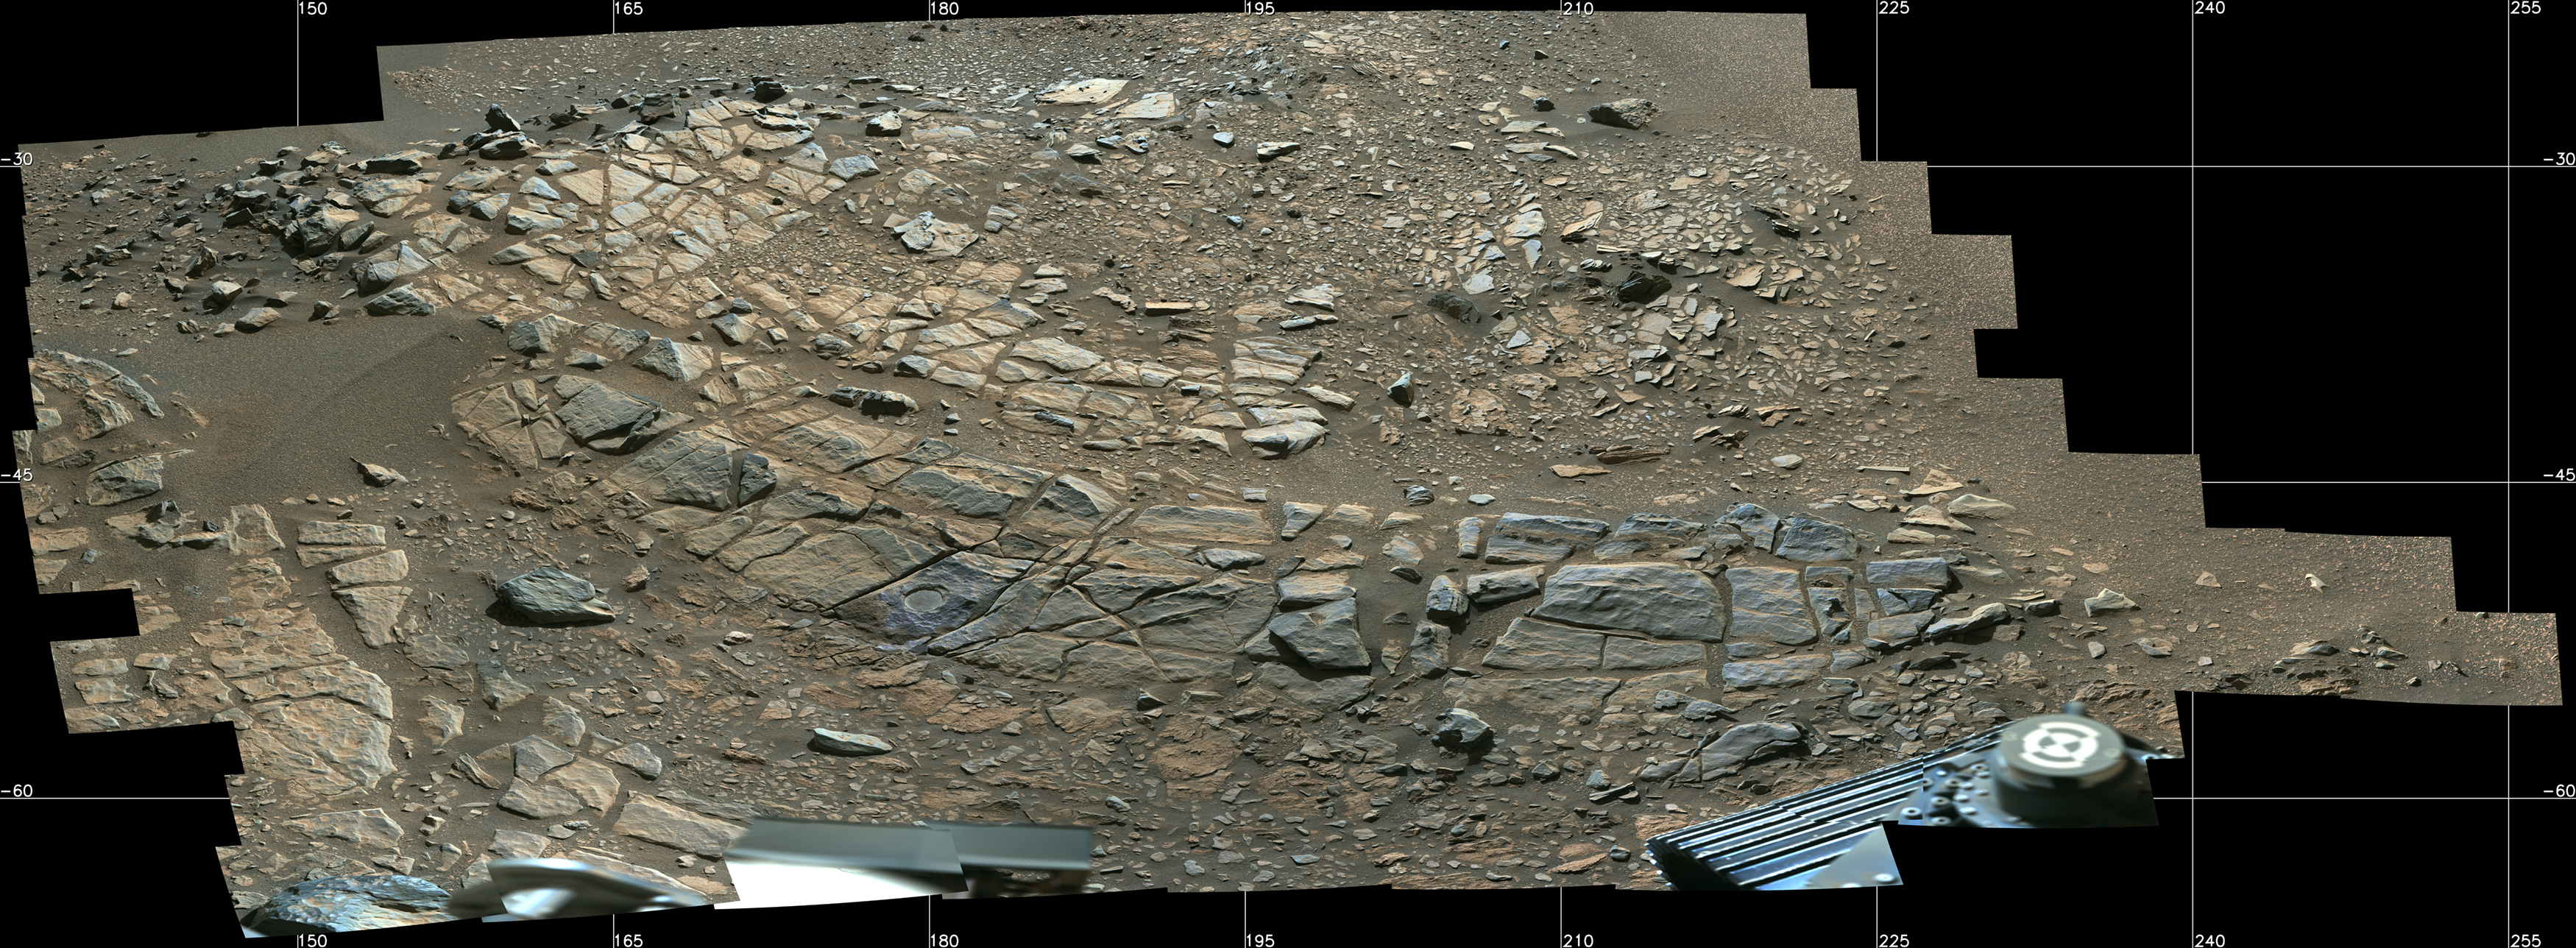 Photos show the Martian surface, filled with shards of rocks in grey and tan.